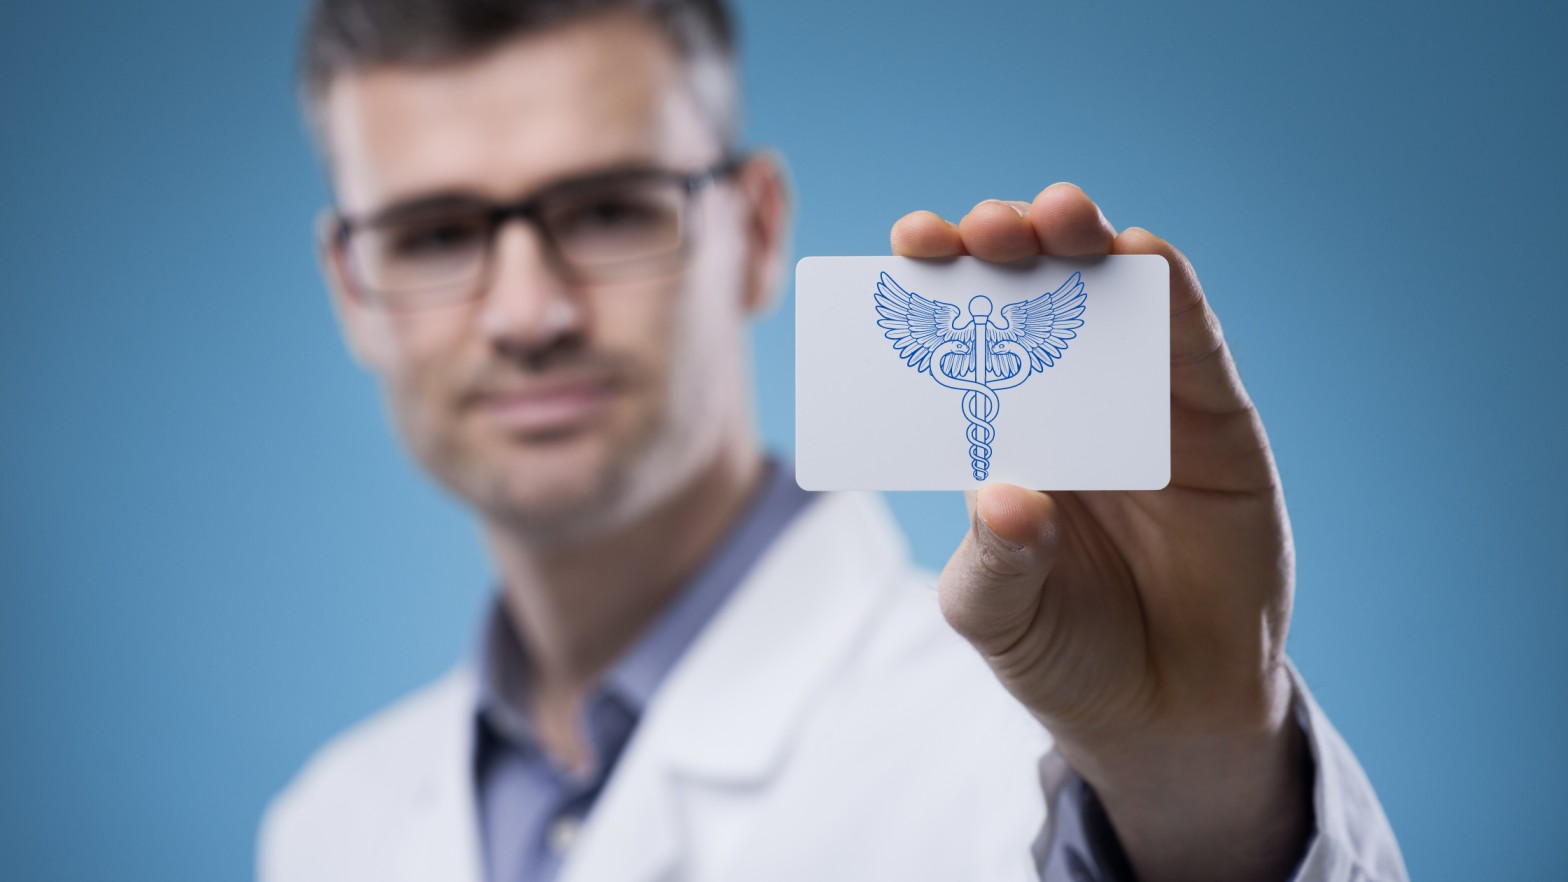 Modern Networking in Healthcare: Smart Business Cards for Doctors